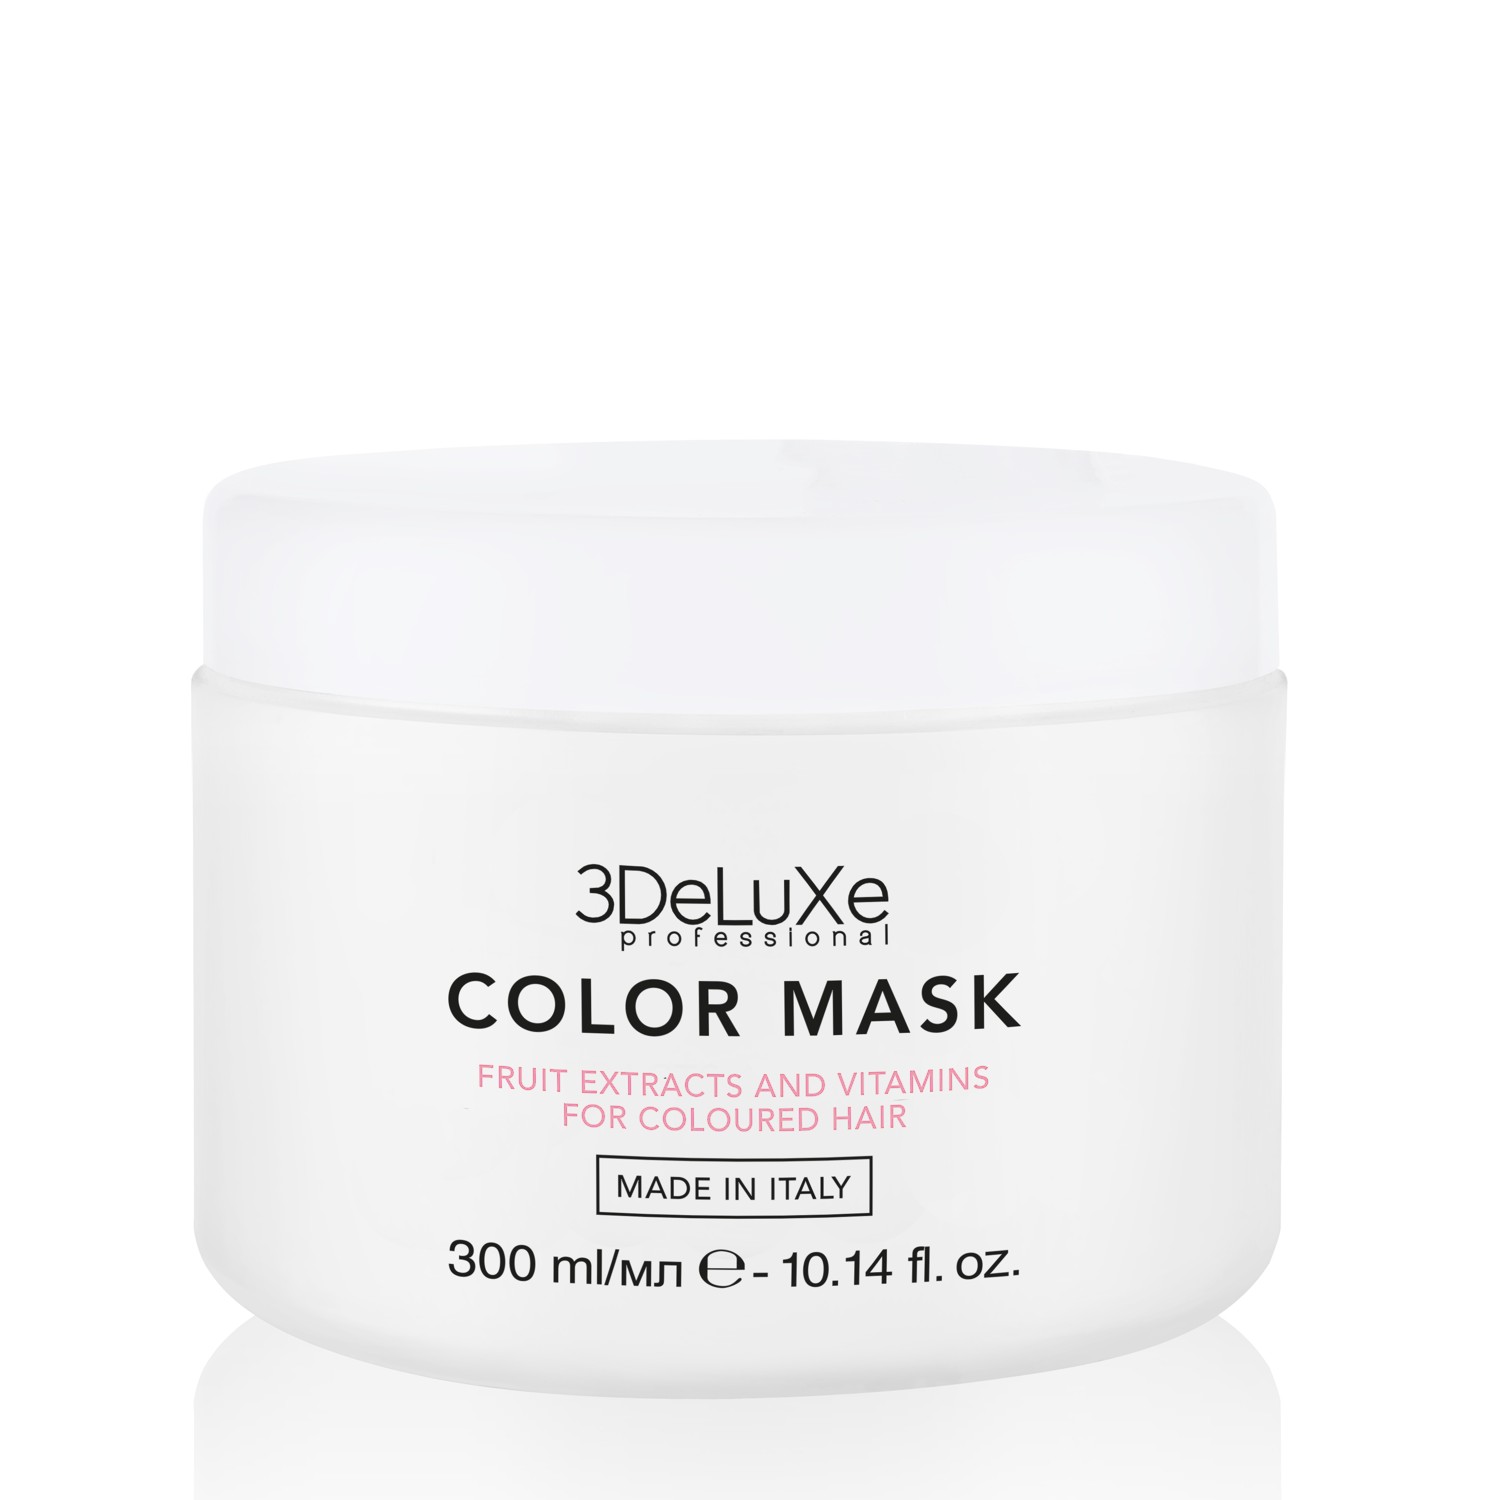 3DeLuXe Professional COLOR Mask 300 ml